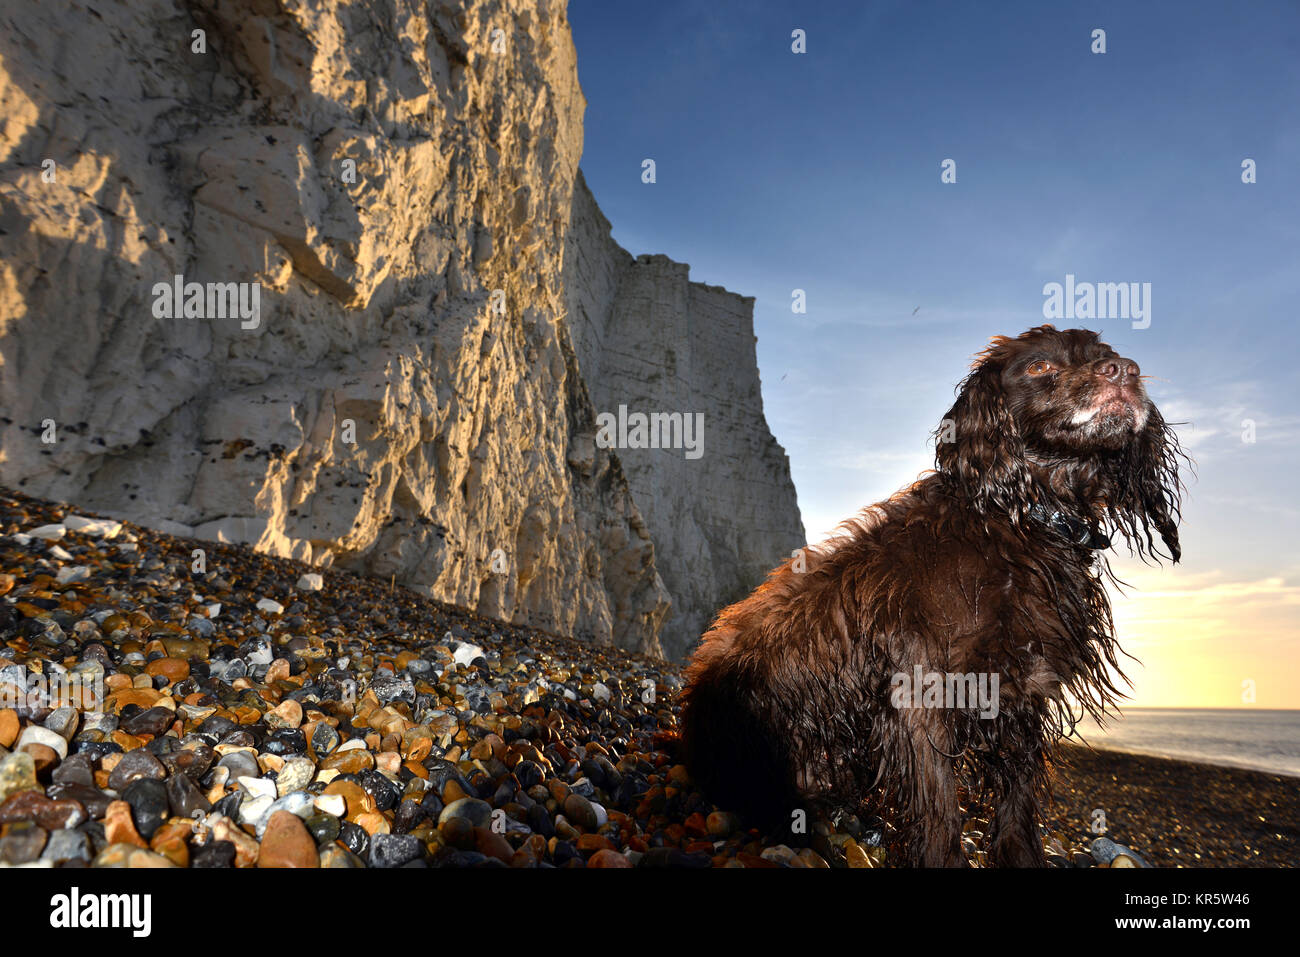 Cuckmere Haven, East Sussex. 18th December 2017. The morning sun illuminating the iconic Seven Sisters chalk cliffs and a cocker spaniel at Cuckmere Haven on a beautiful crisp morning along the South Coast. Credit: Peter Cripps/Alamy Live News Stock Photo